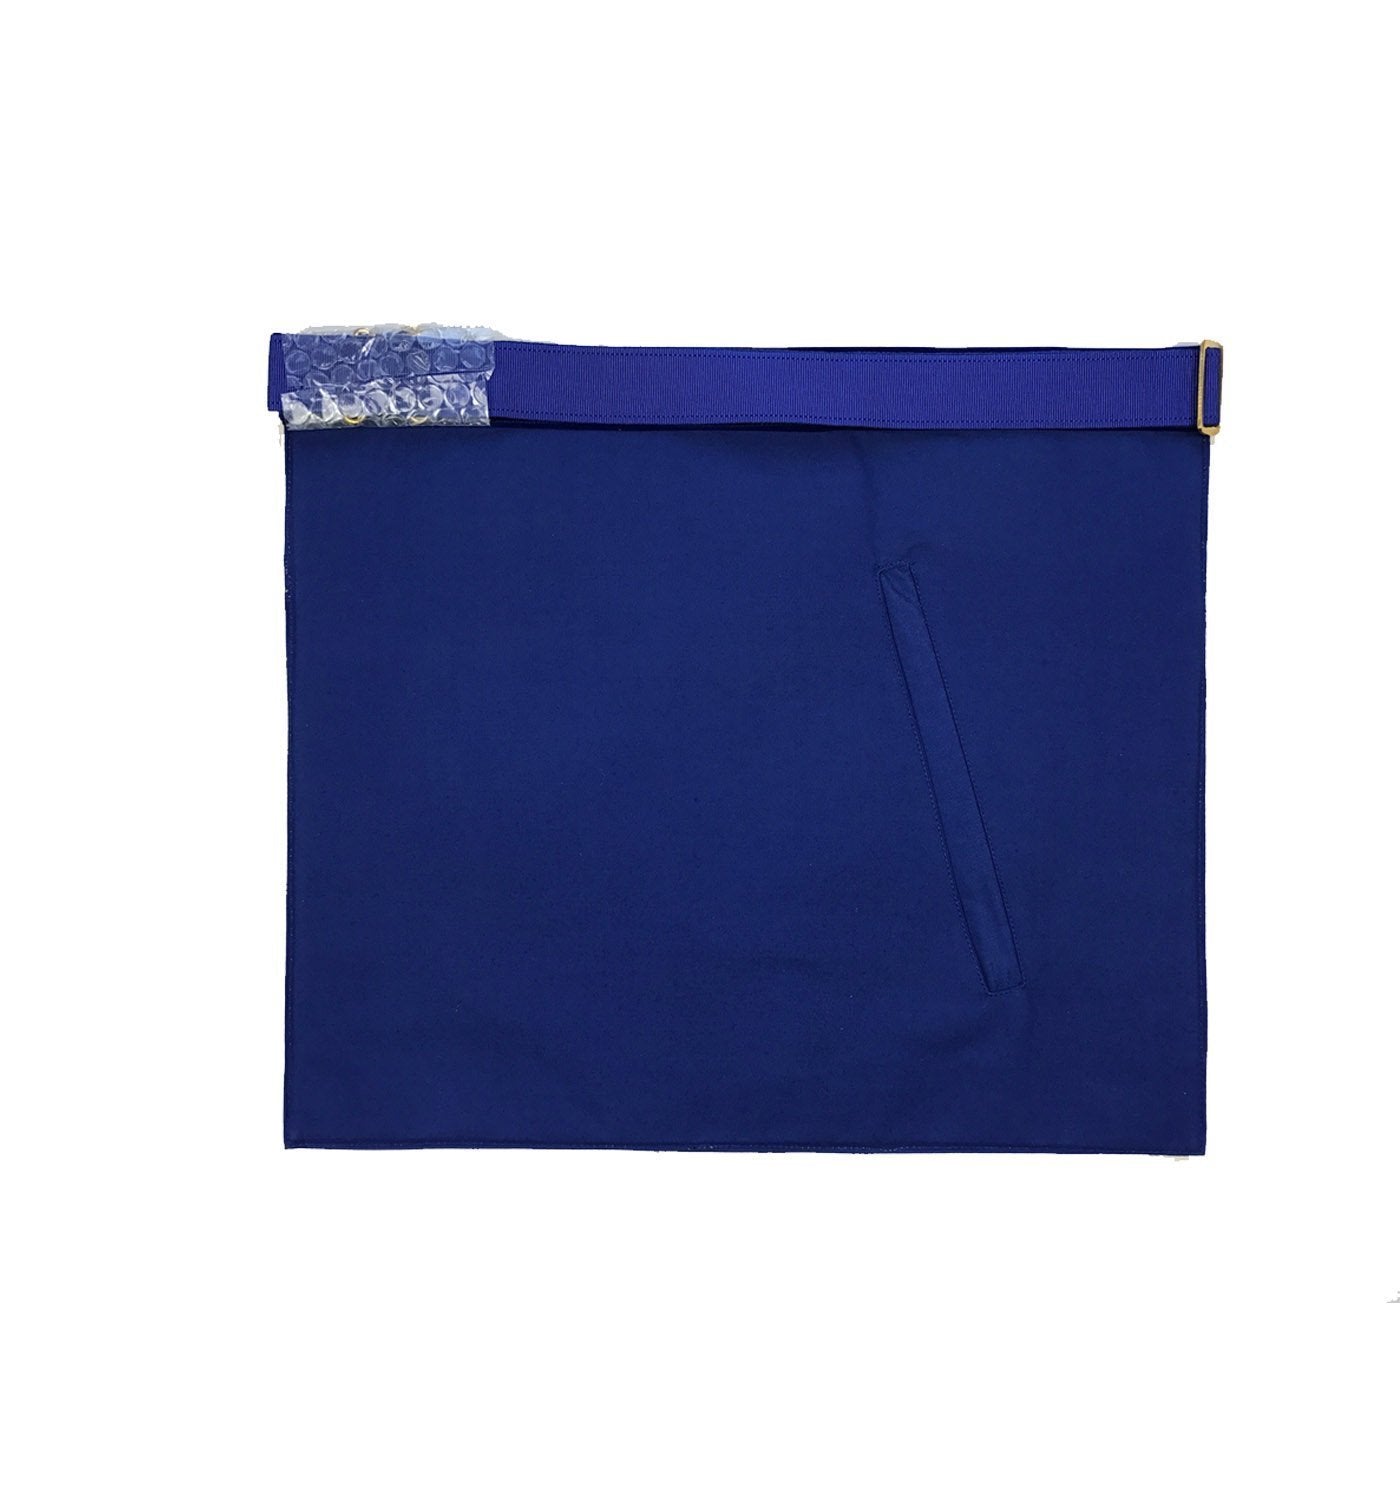 Past Master Blue Lodge Apron - Blue Velvet with Silver Hand Embroidery - Bricks Masons